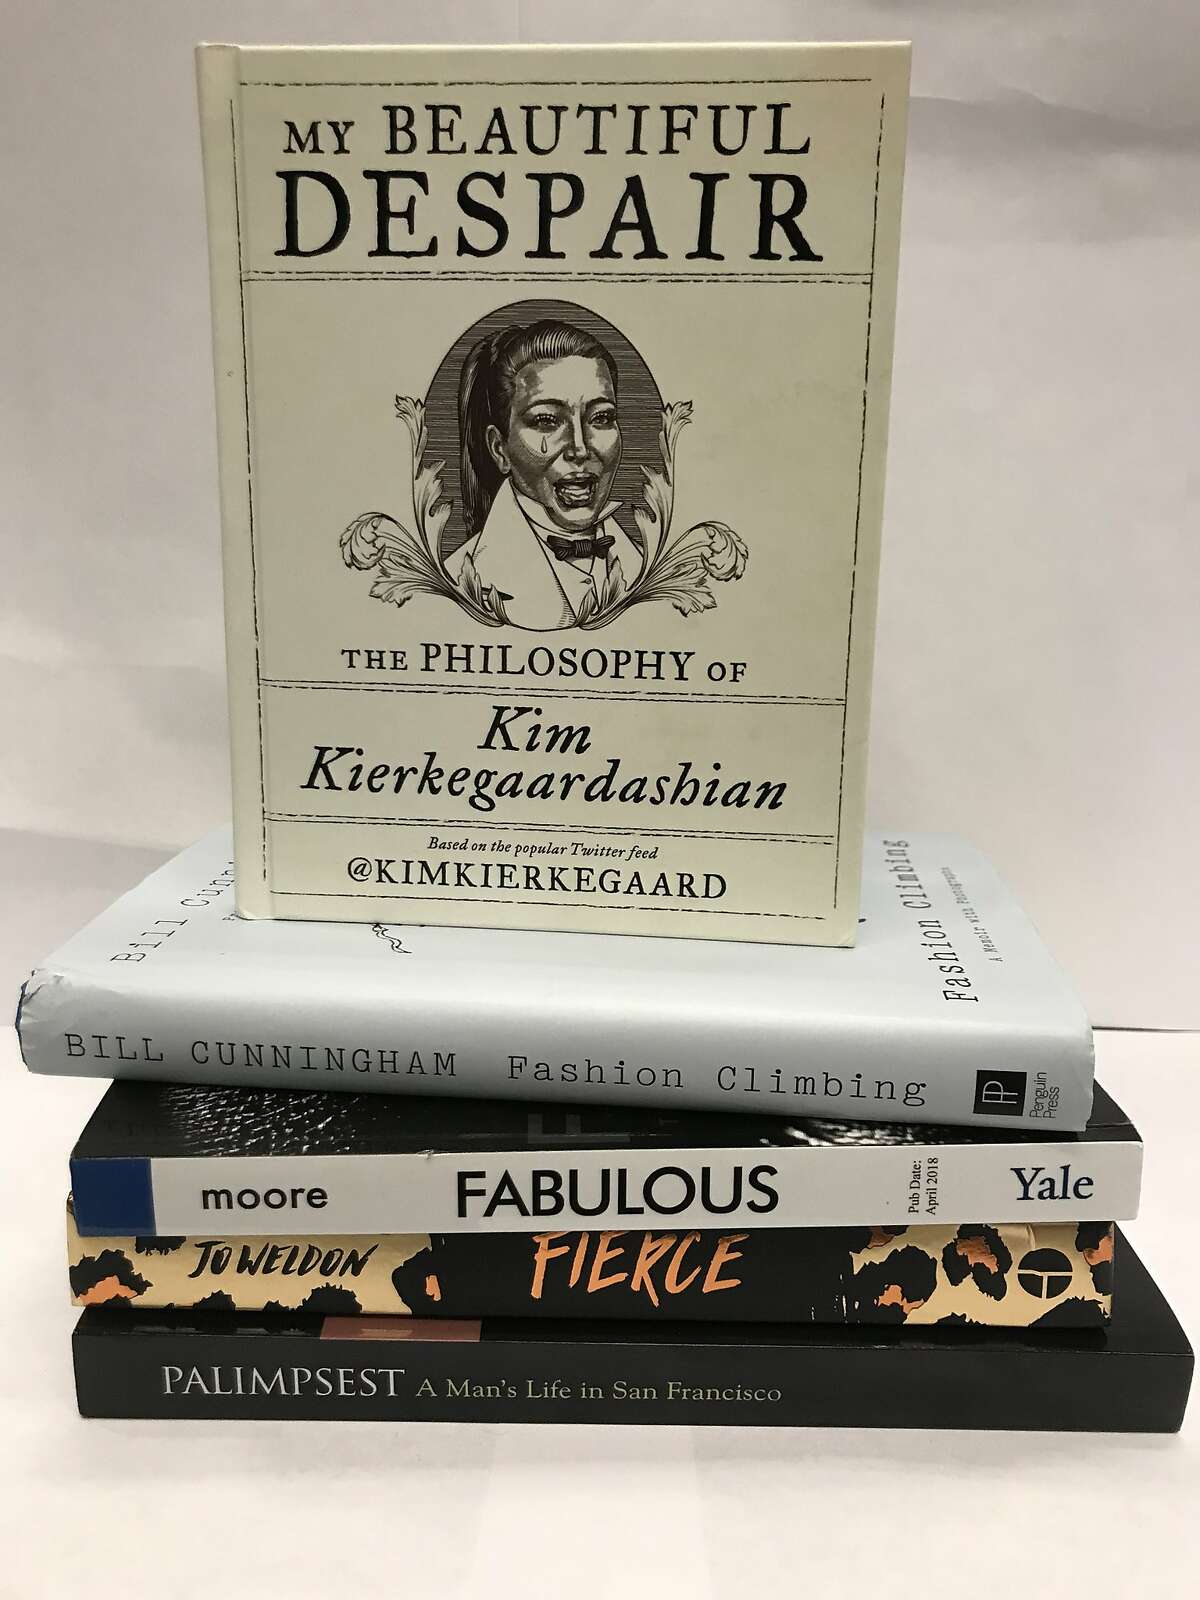 Style's picks for fall 2018 reading include "Fabulous," "Fashion Climbing," "Fierce," "My Beautiful Despair" and "Palimpsest."